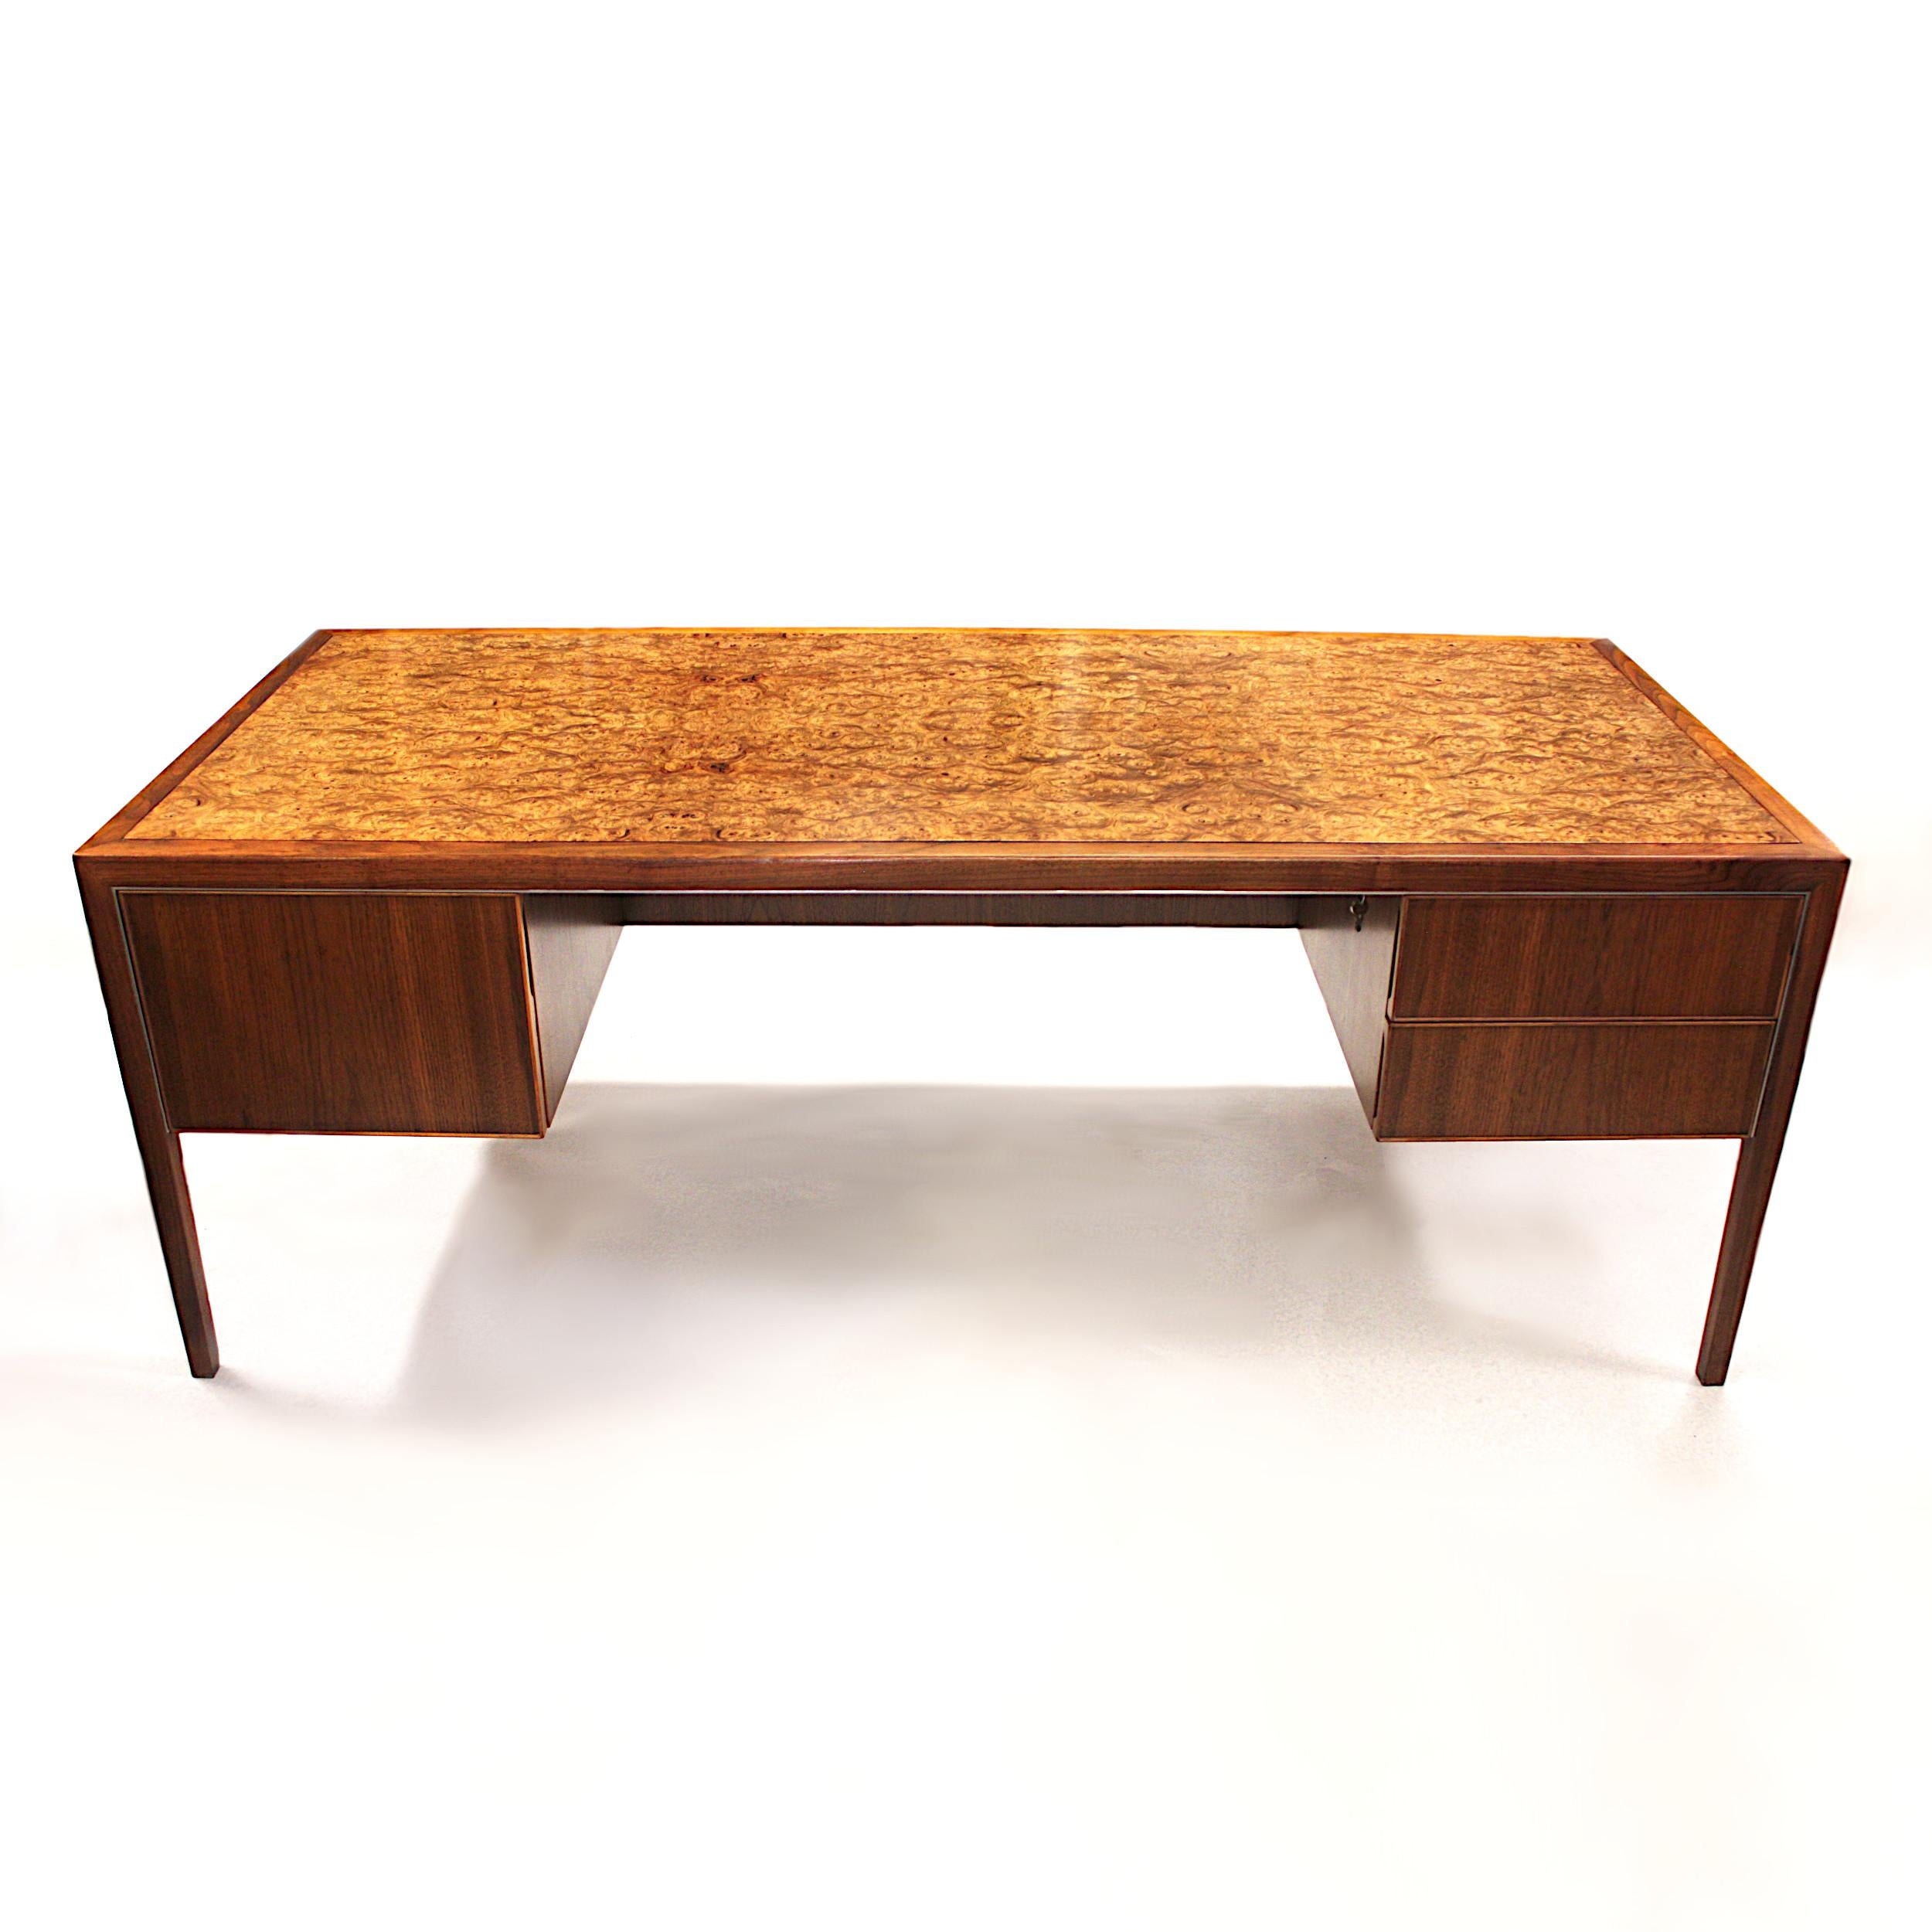 This wonderful Mid-Century Modern desk by Stow Davis is full of unique features. With its beautifully clean lines, Burled oak top, and touch of polished aluminum accents, it is the epitome of 1970s chic. Stow Davis is renowned for its quality and